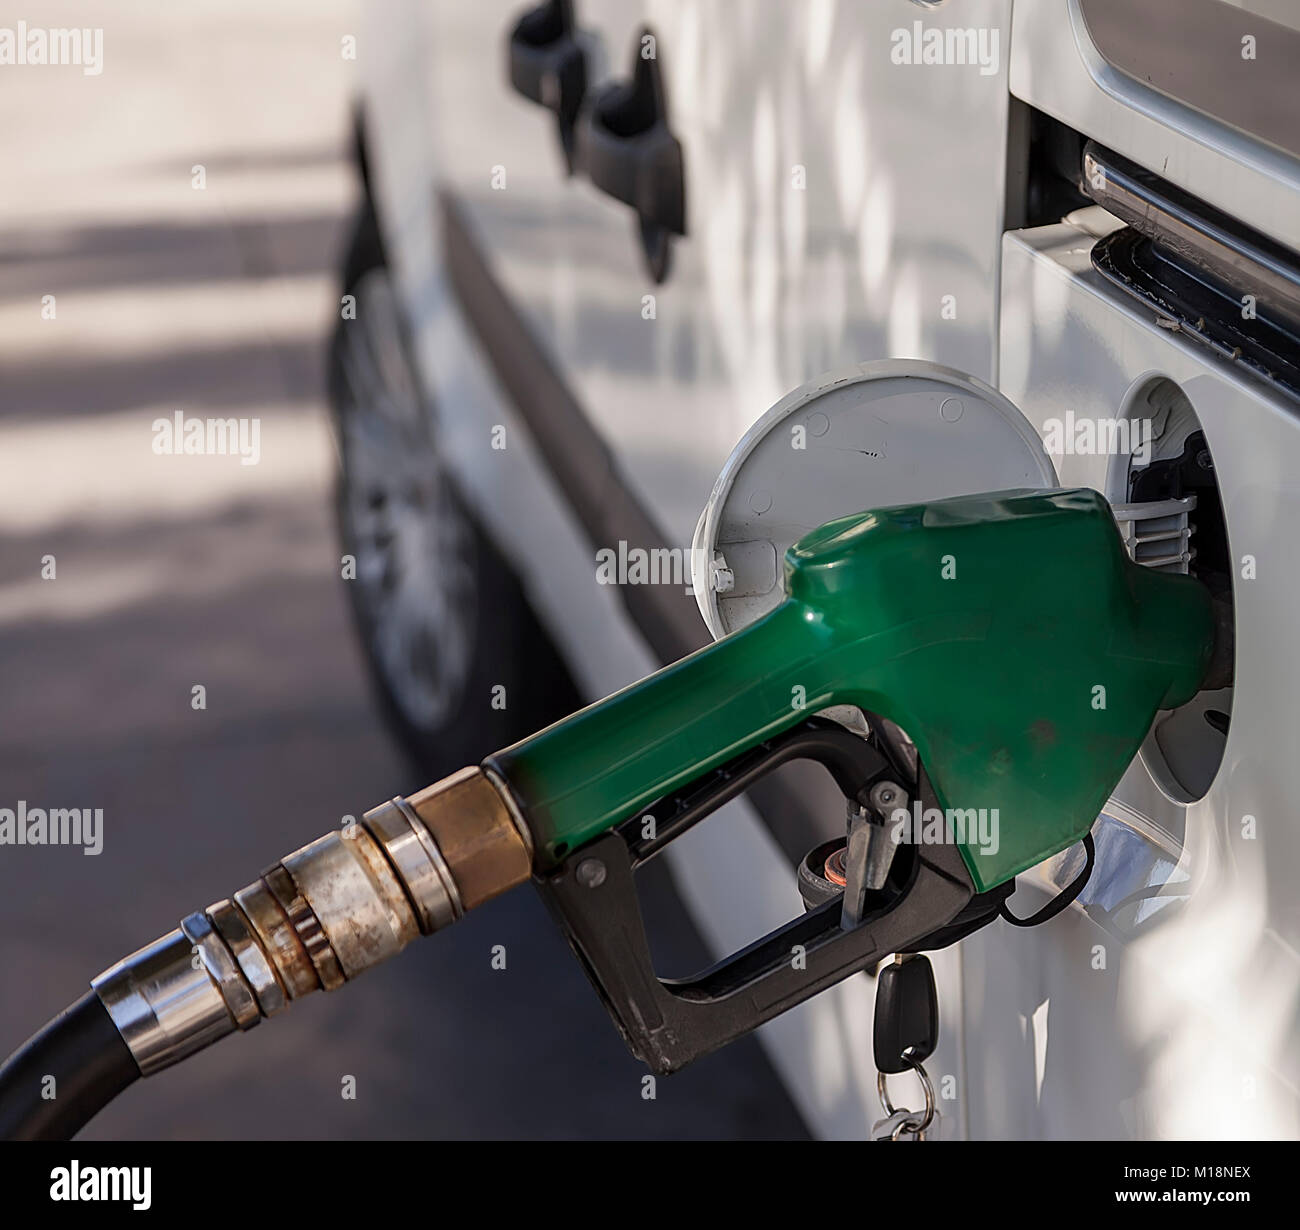 Filling up  with fuel in the car, fuel pistol isolated.Stock Photo. Stock Photo